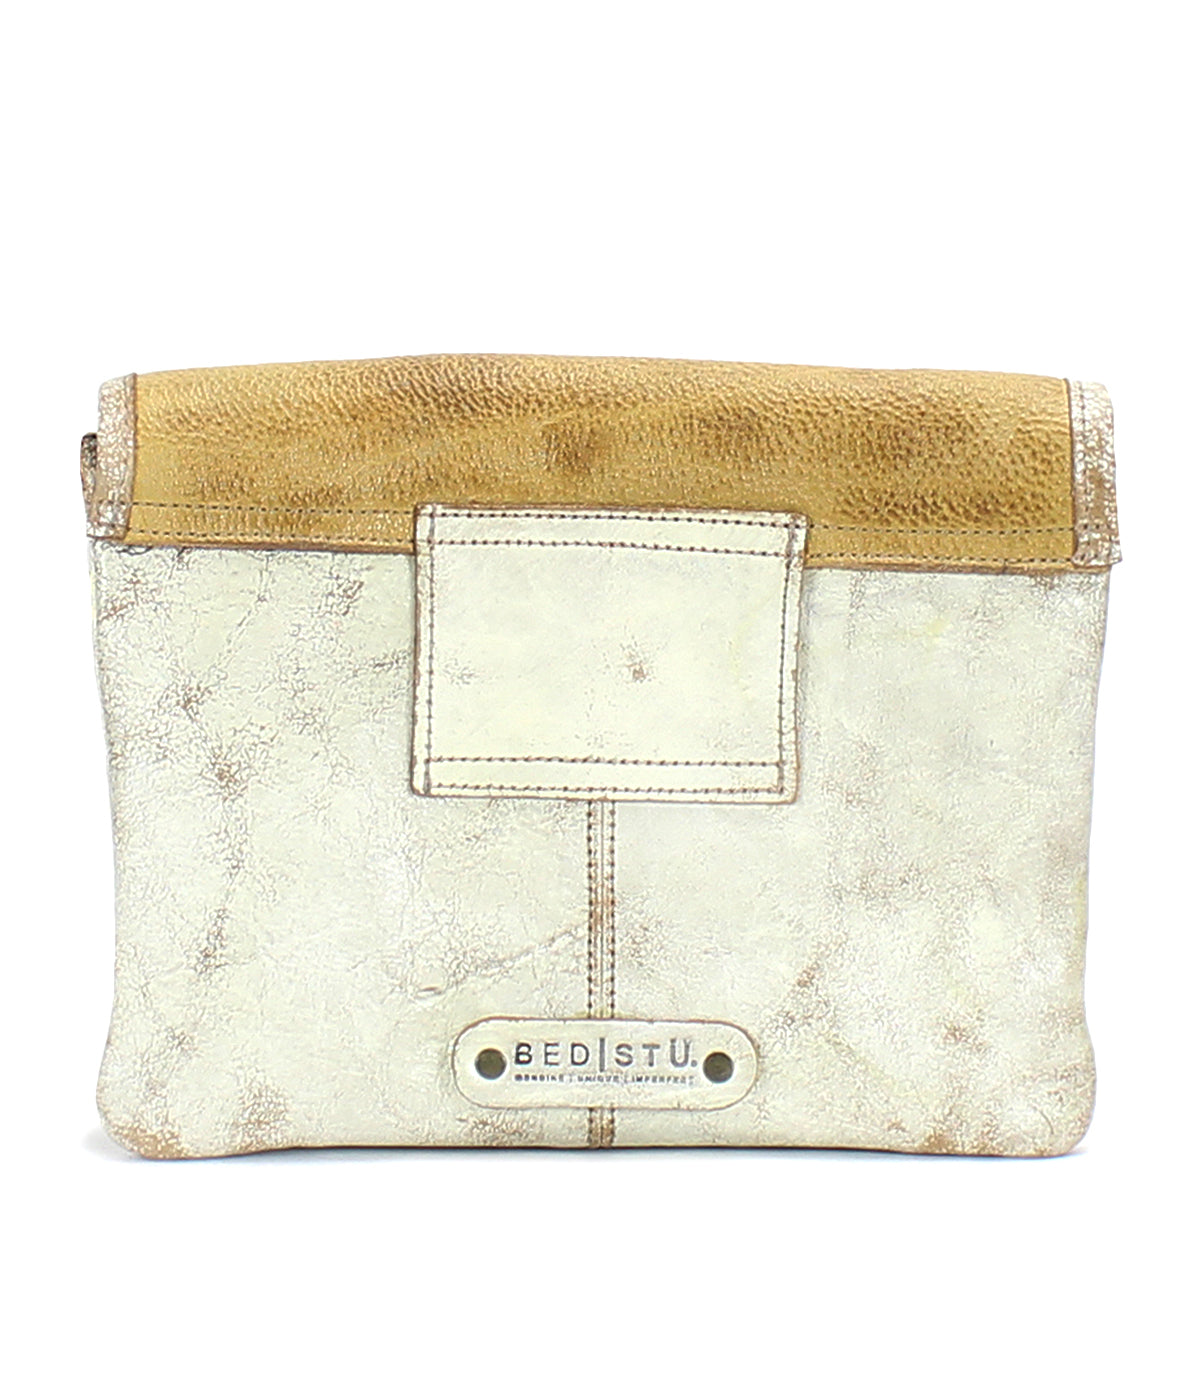 A stylish Bed Stu Ziggy II white and tan leather clutch bag with compartments.